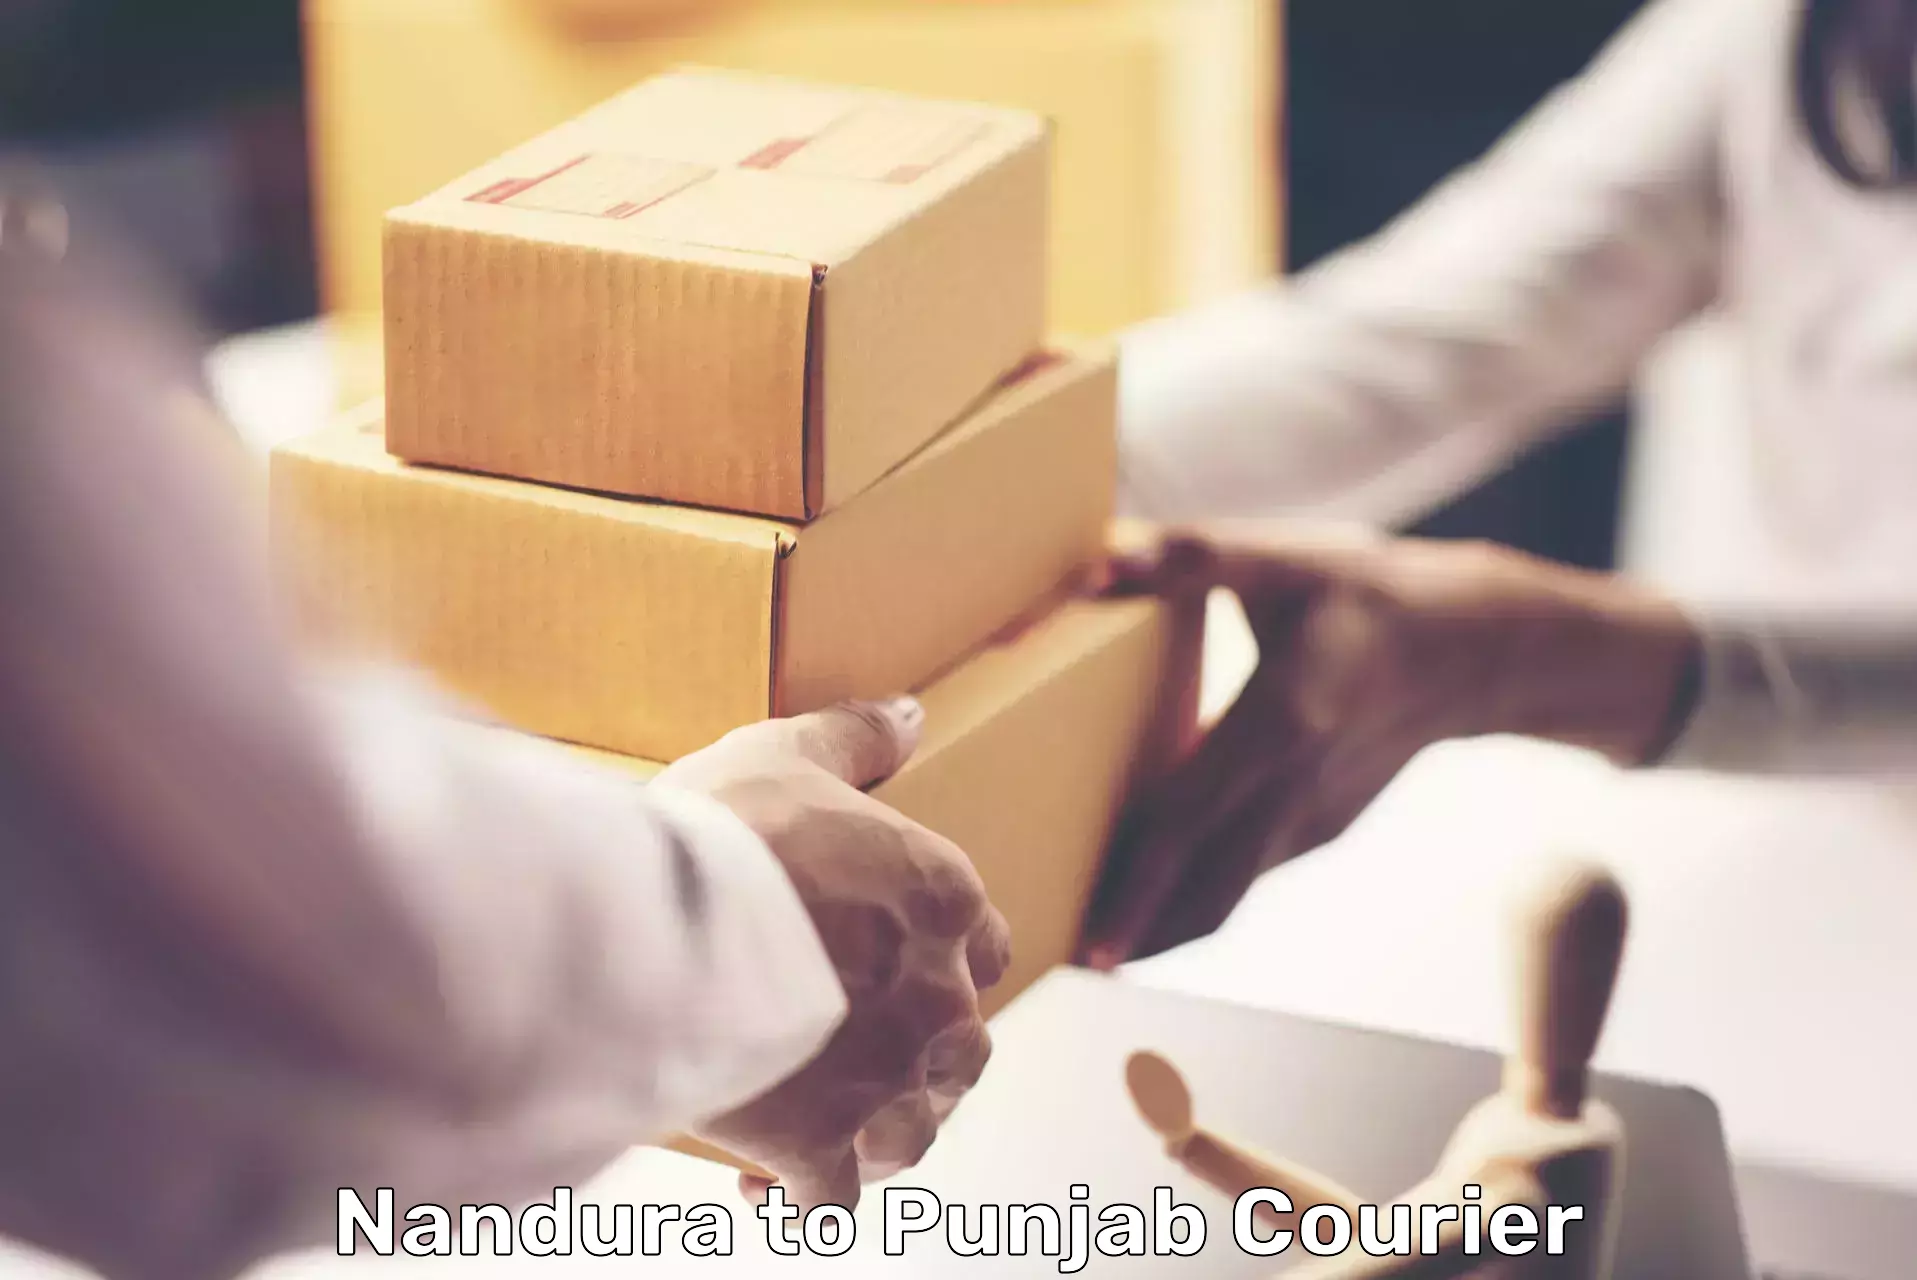 Professional parcel services in Nandura to Punjab